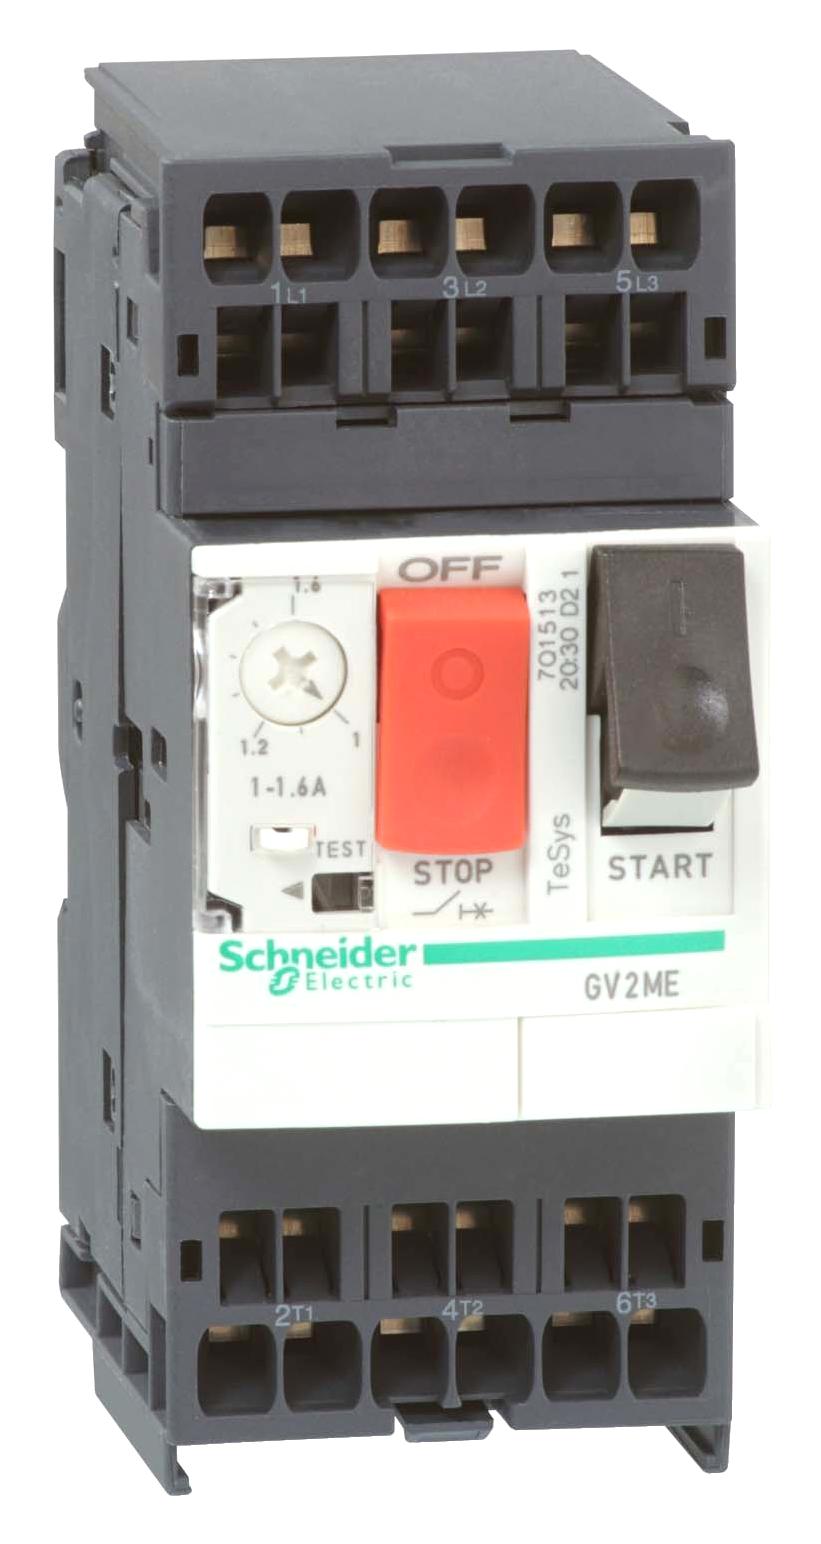 GV2ME163 THERMOMAGNETIC CKT BREAKER, 3P, 14A SCHNEIDER ELECTRIC